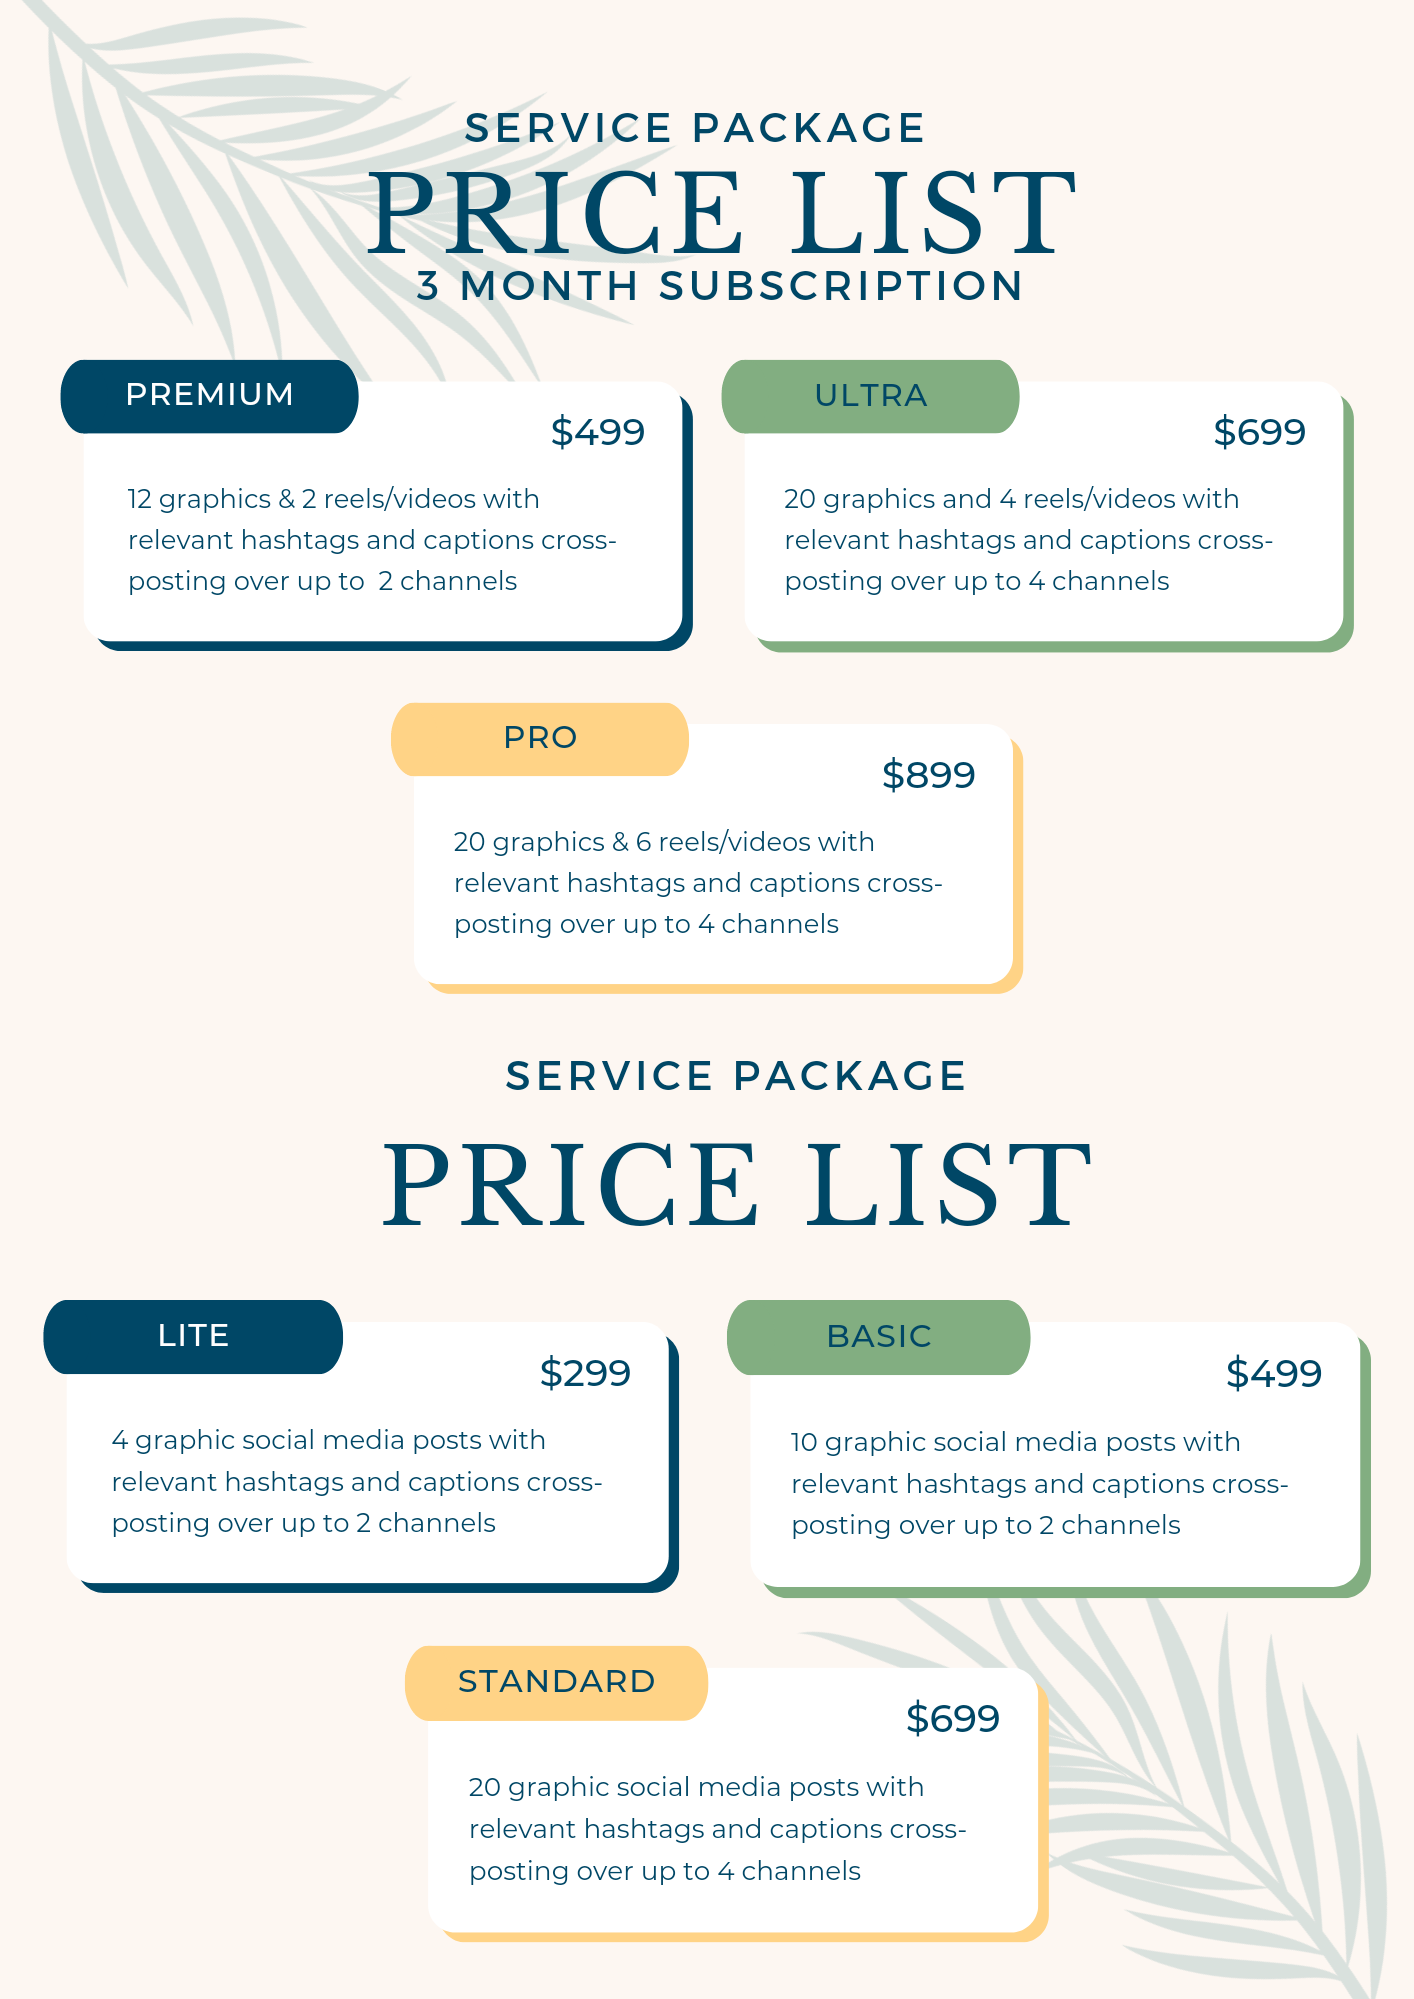 Basic Service Package